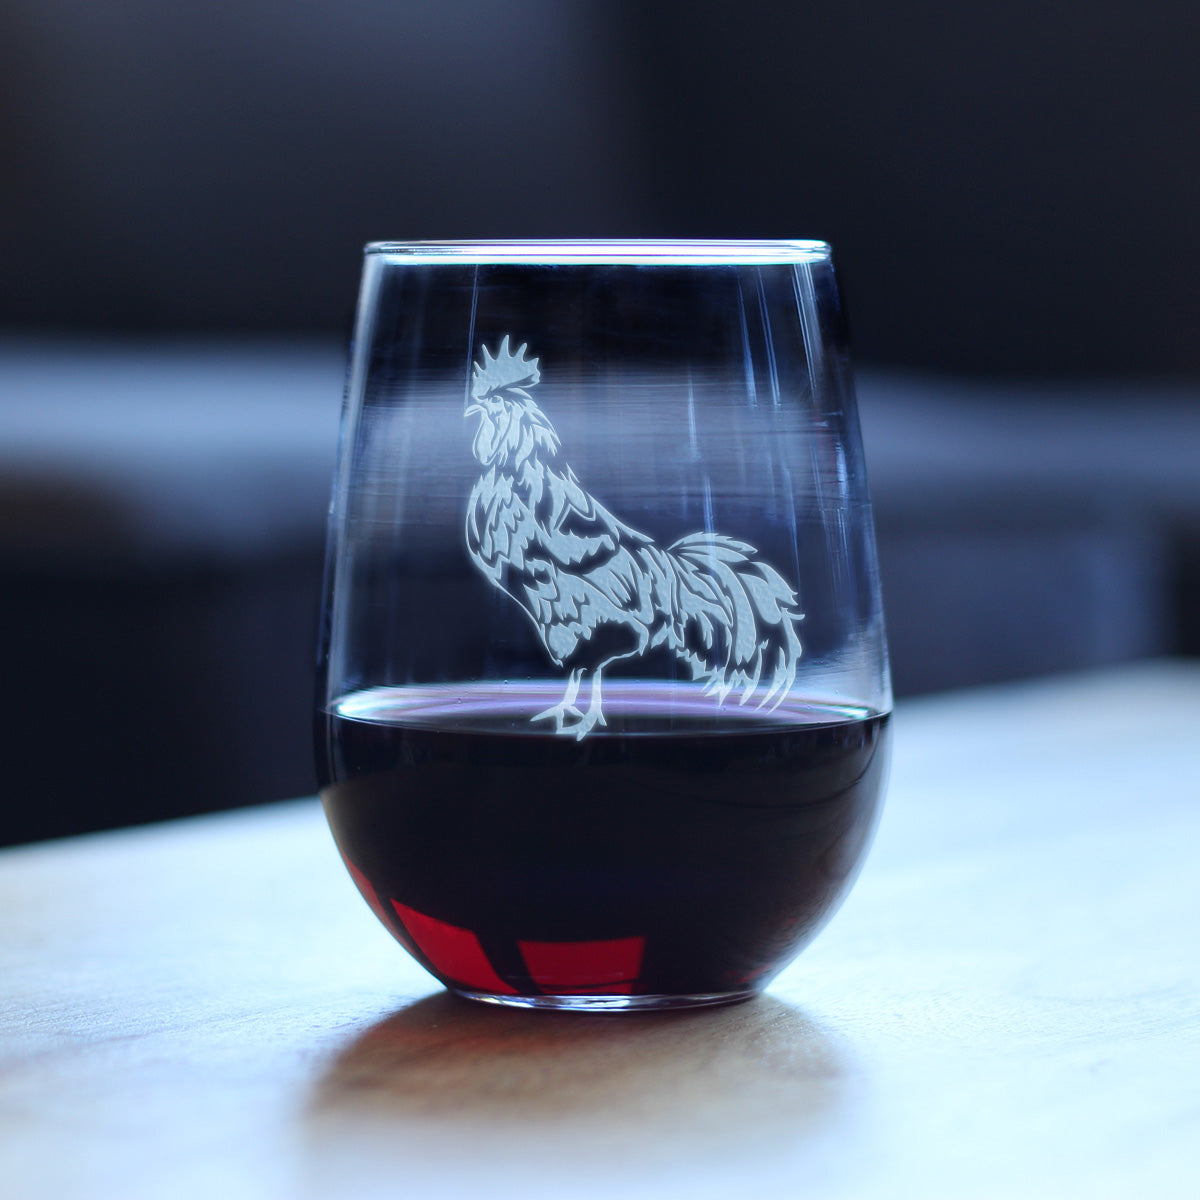 Rooster Stemless Wine Glass - Cute Funny Farm Animal Themed Decor and Chicken Gifts - Large 17 Oz